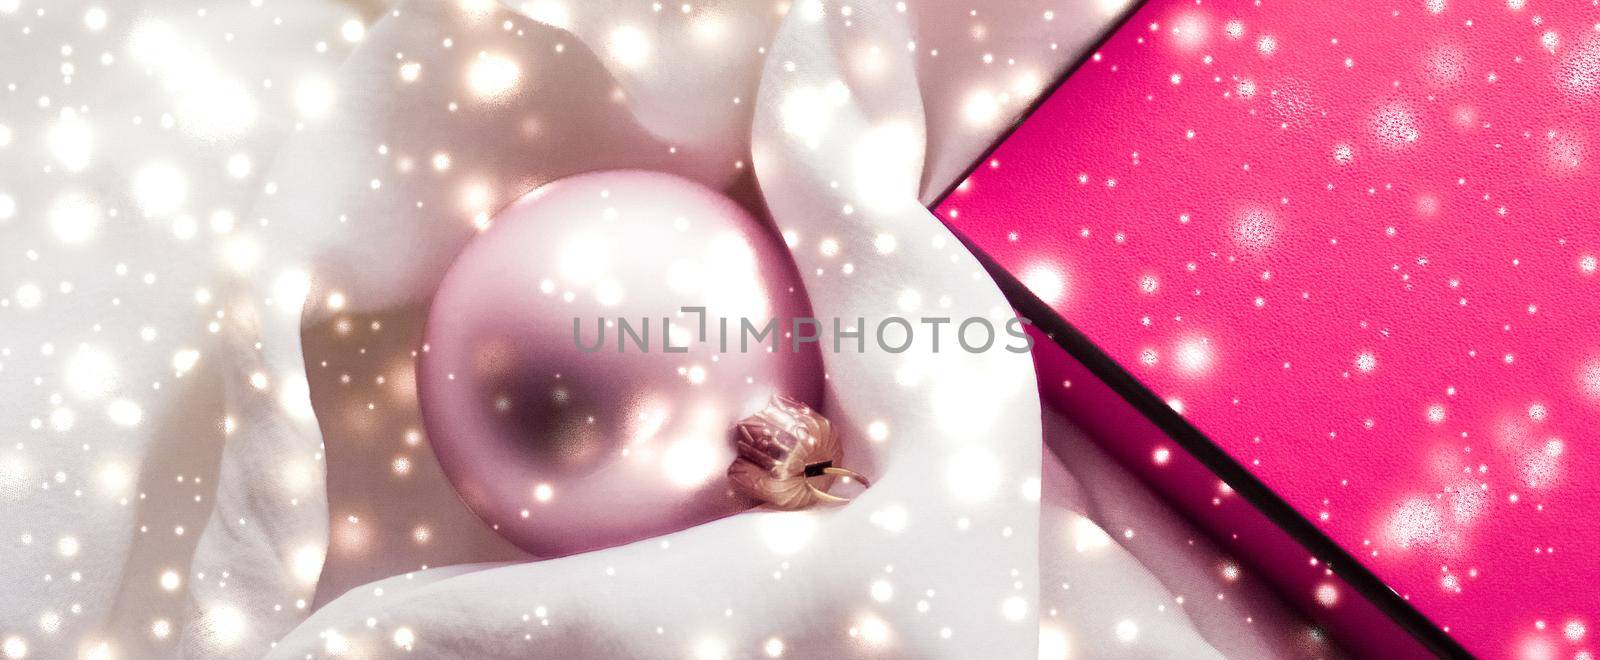 Holidays branding, glamour and decoration concept - Christmas magic holiday background, festive baubles, pink vintage gift box and golden glitter as winter season present for luxury brand design